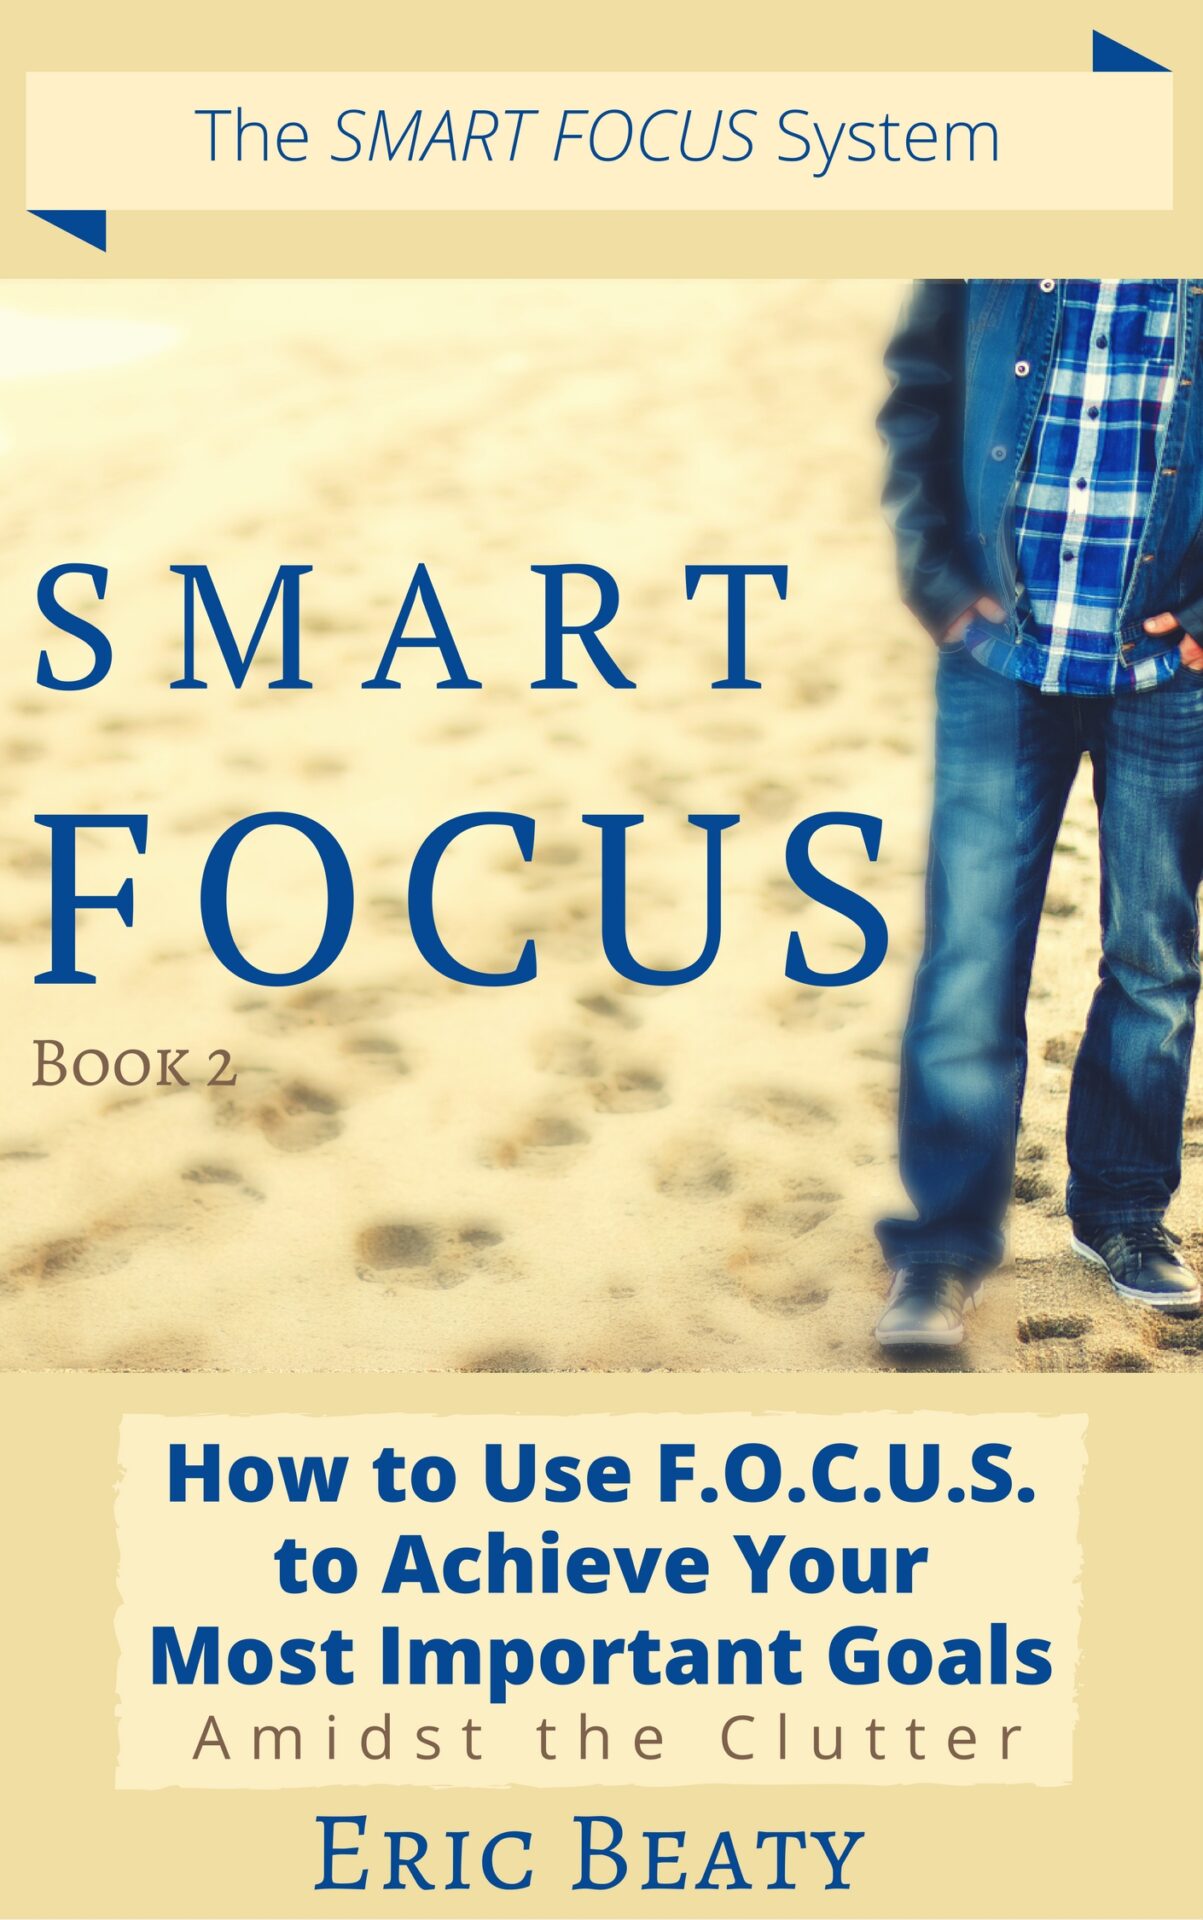 SMART FOCUS Cover Book 2 (Newest)